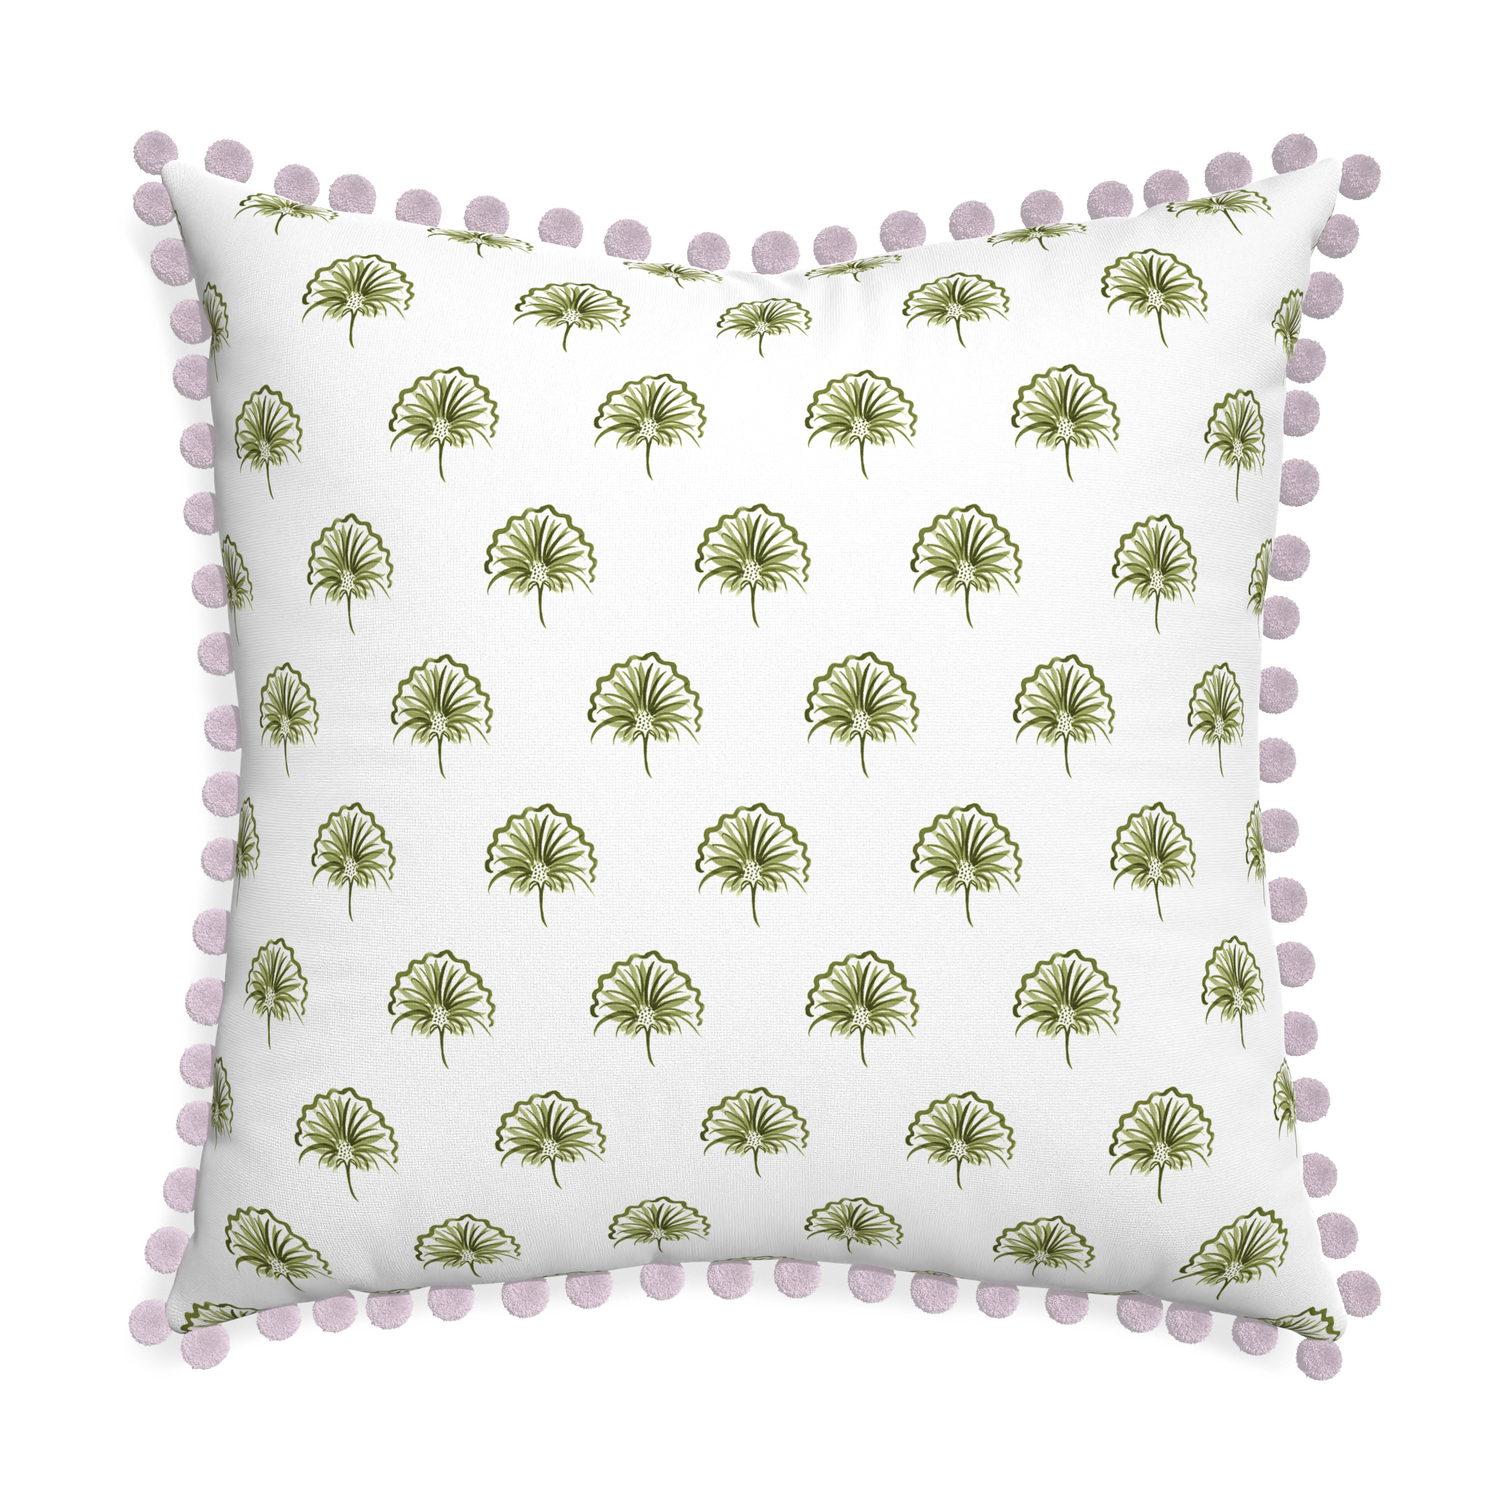 Euro-sham penelope moss custom green floralpillow with l on white background